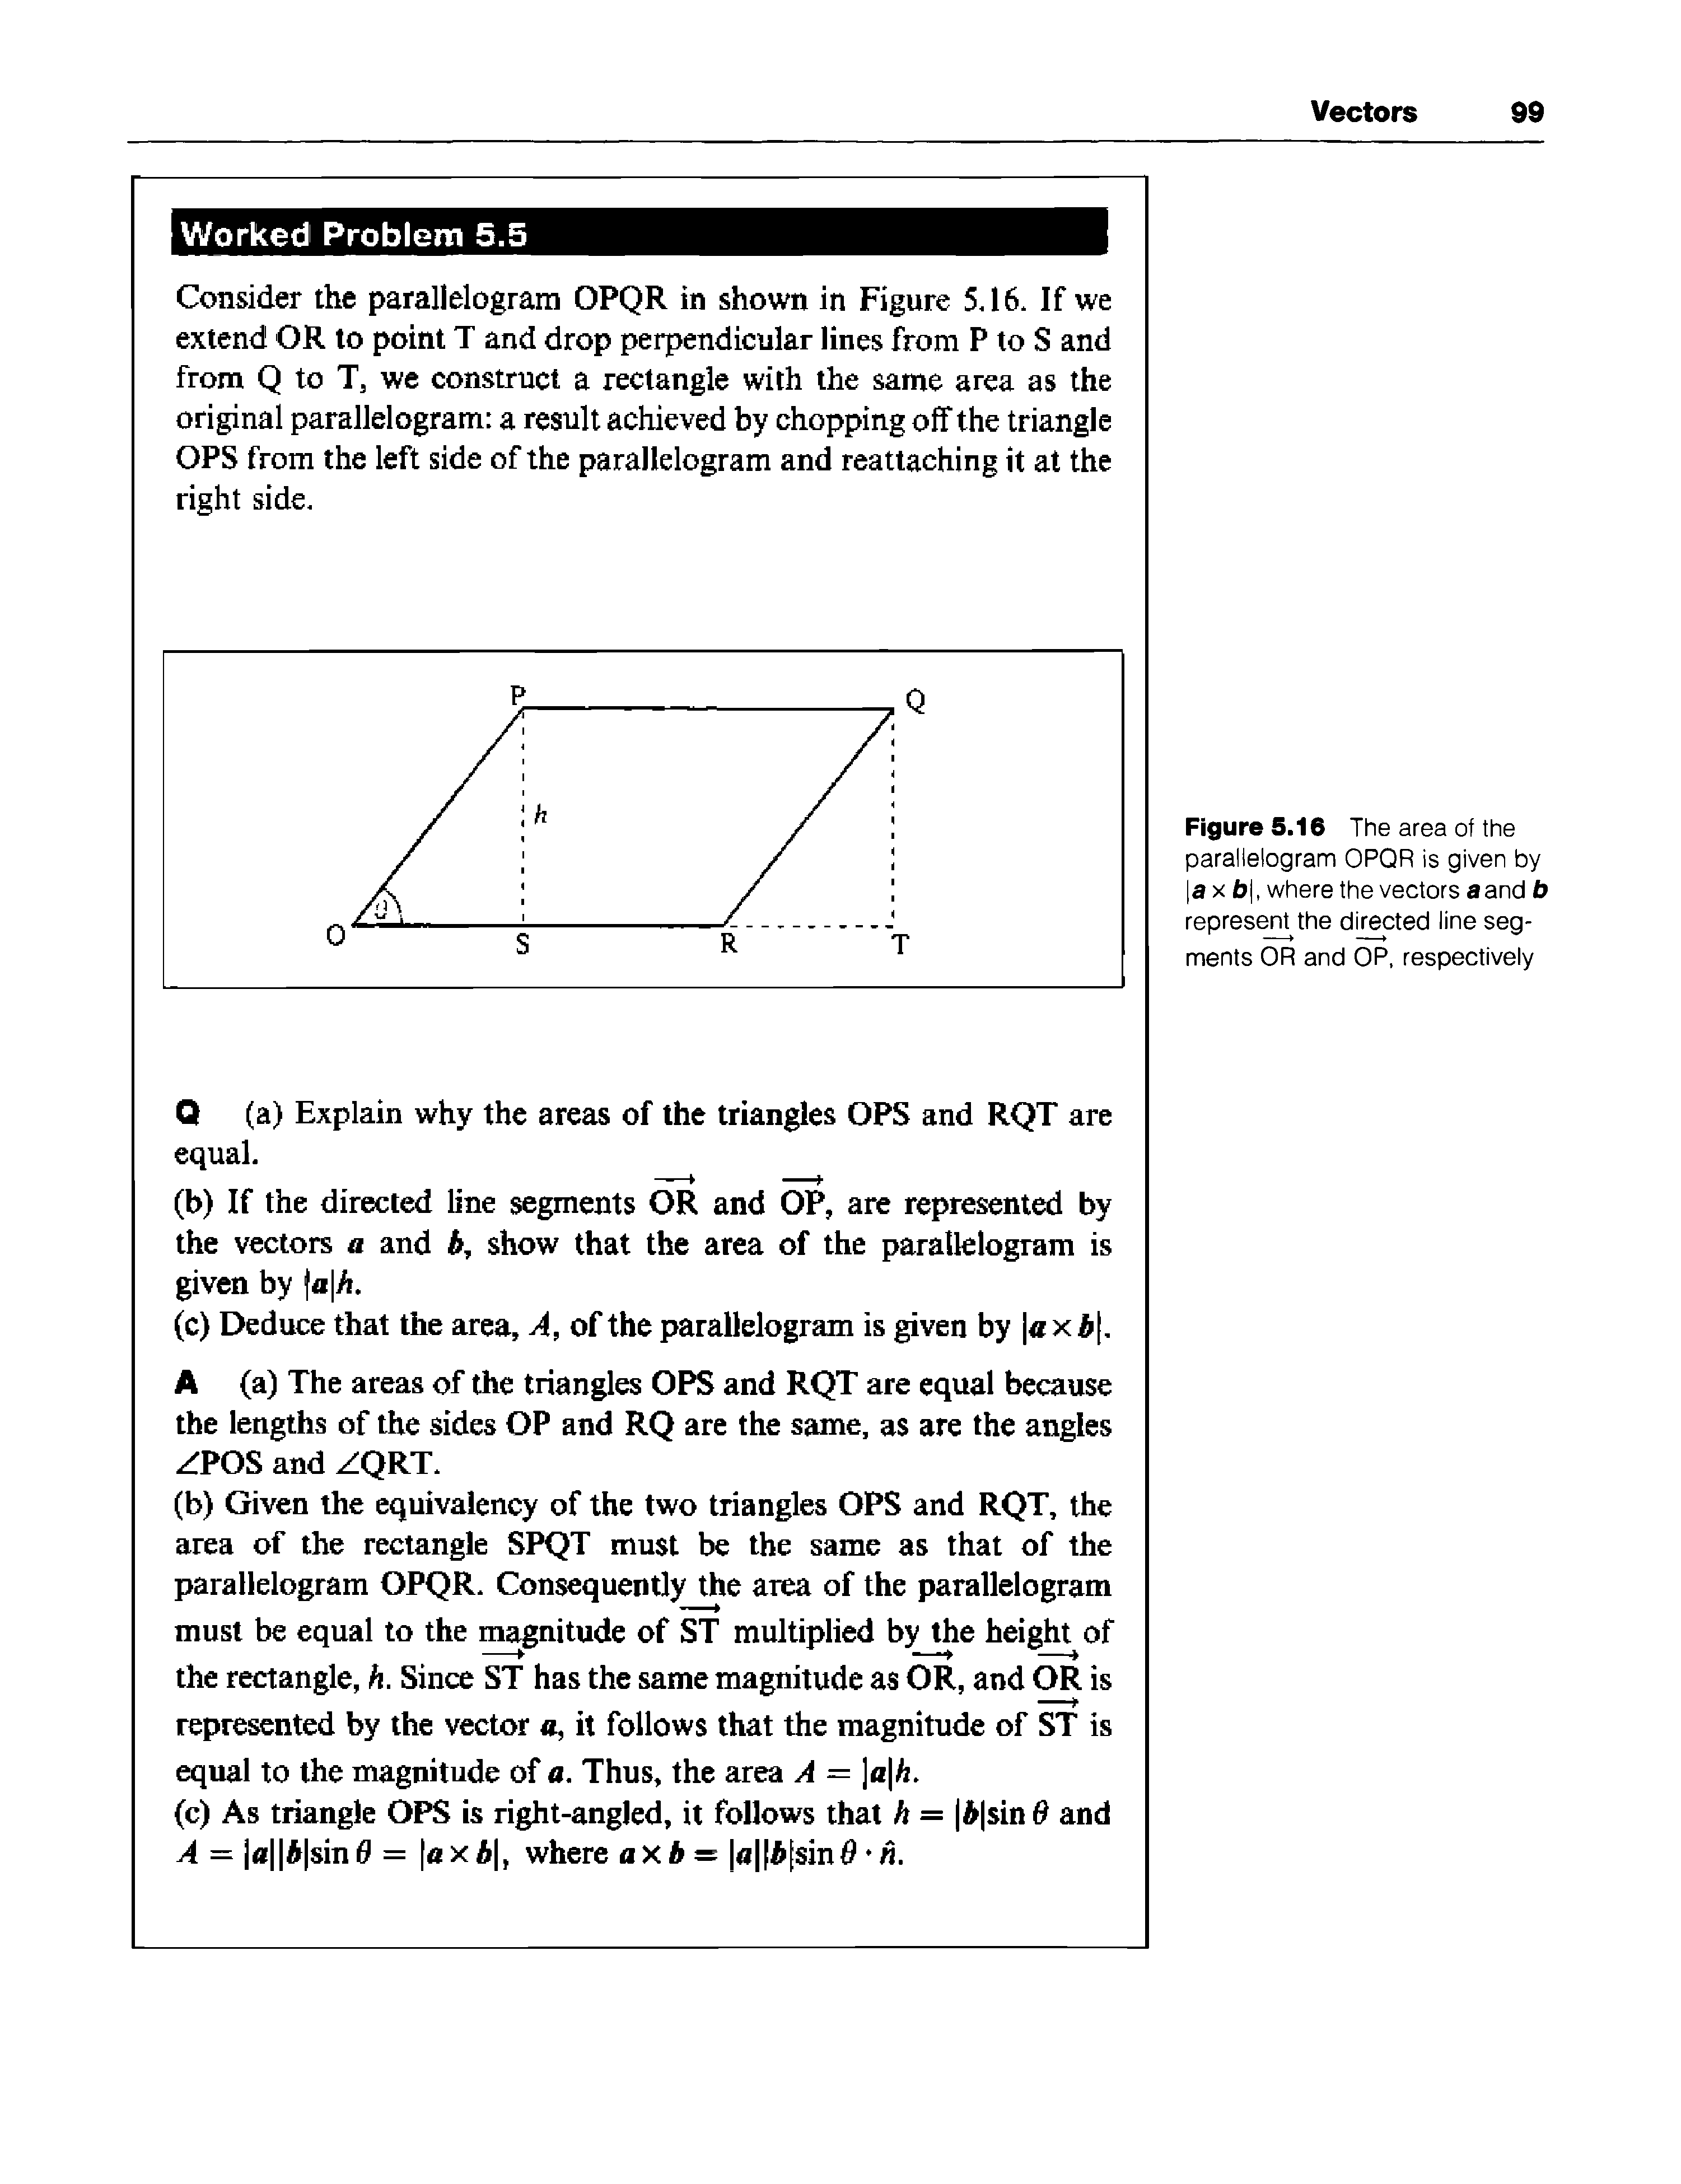 Figure 5.16 The area of the parallelogram OPQR is given by la X b, where the vectors a and b represent the directed line segments OR and OP. respectively...